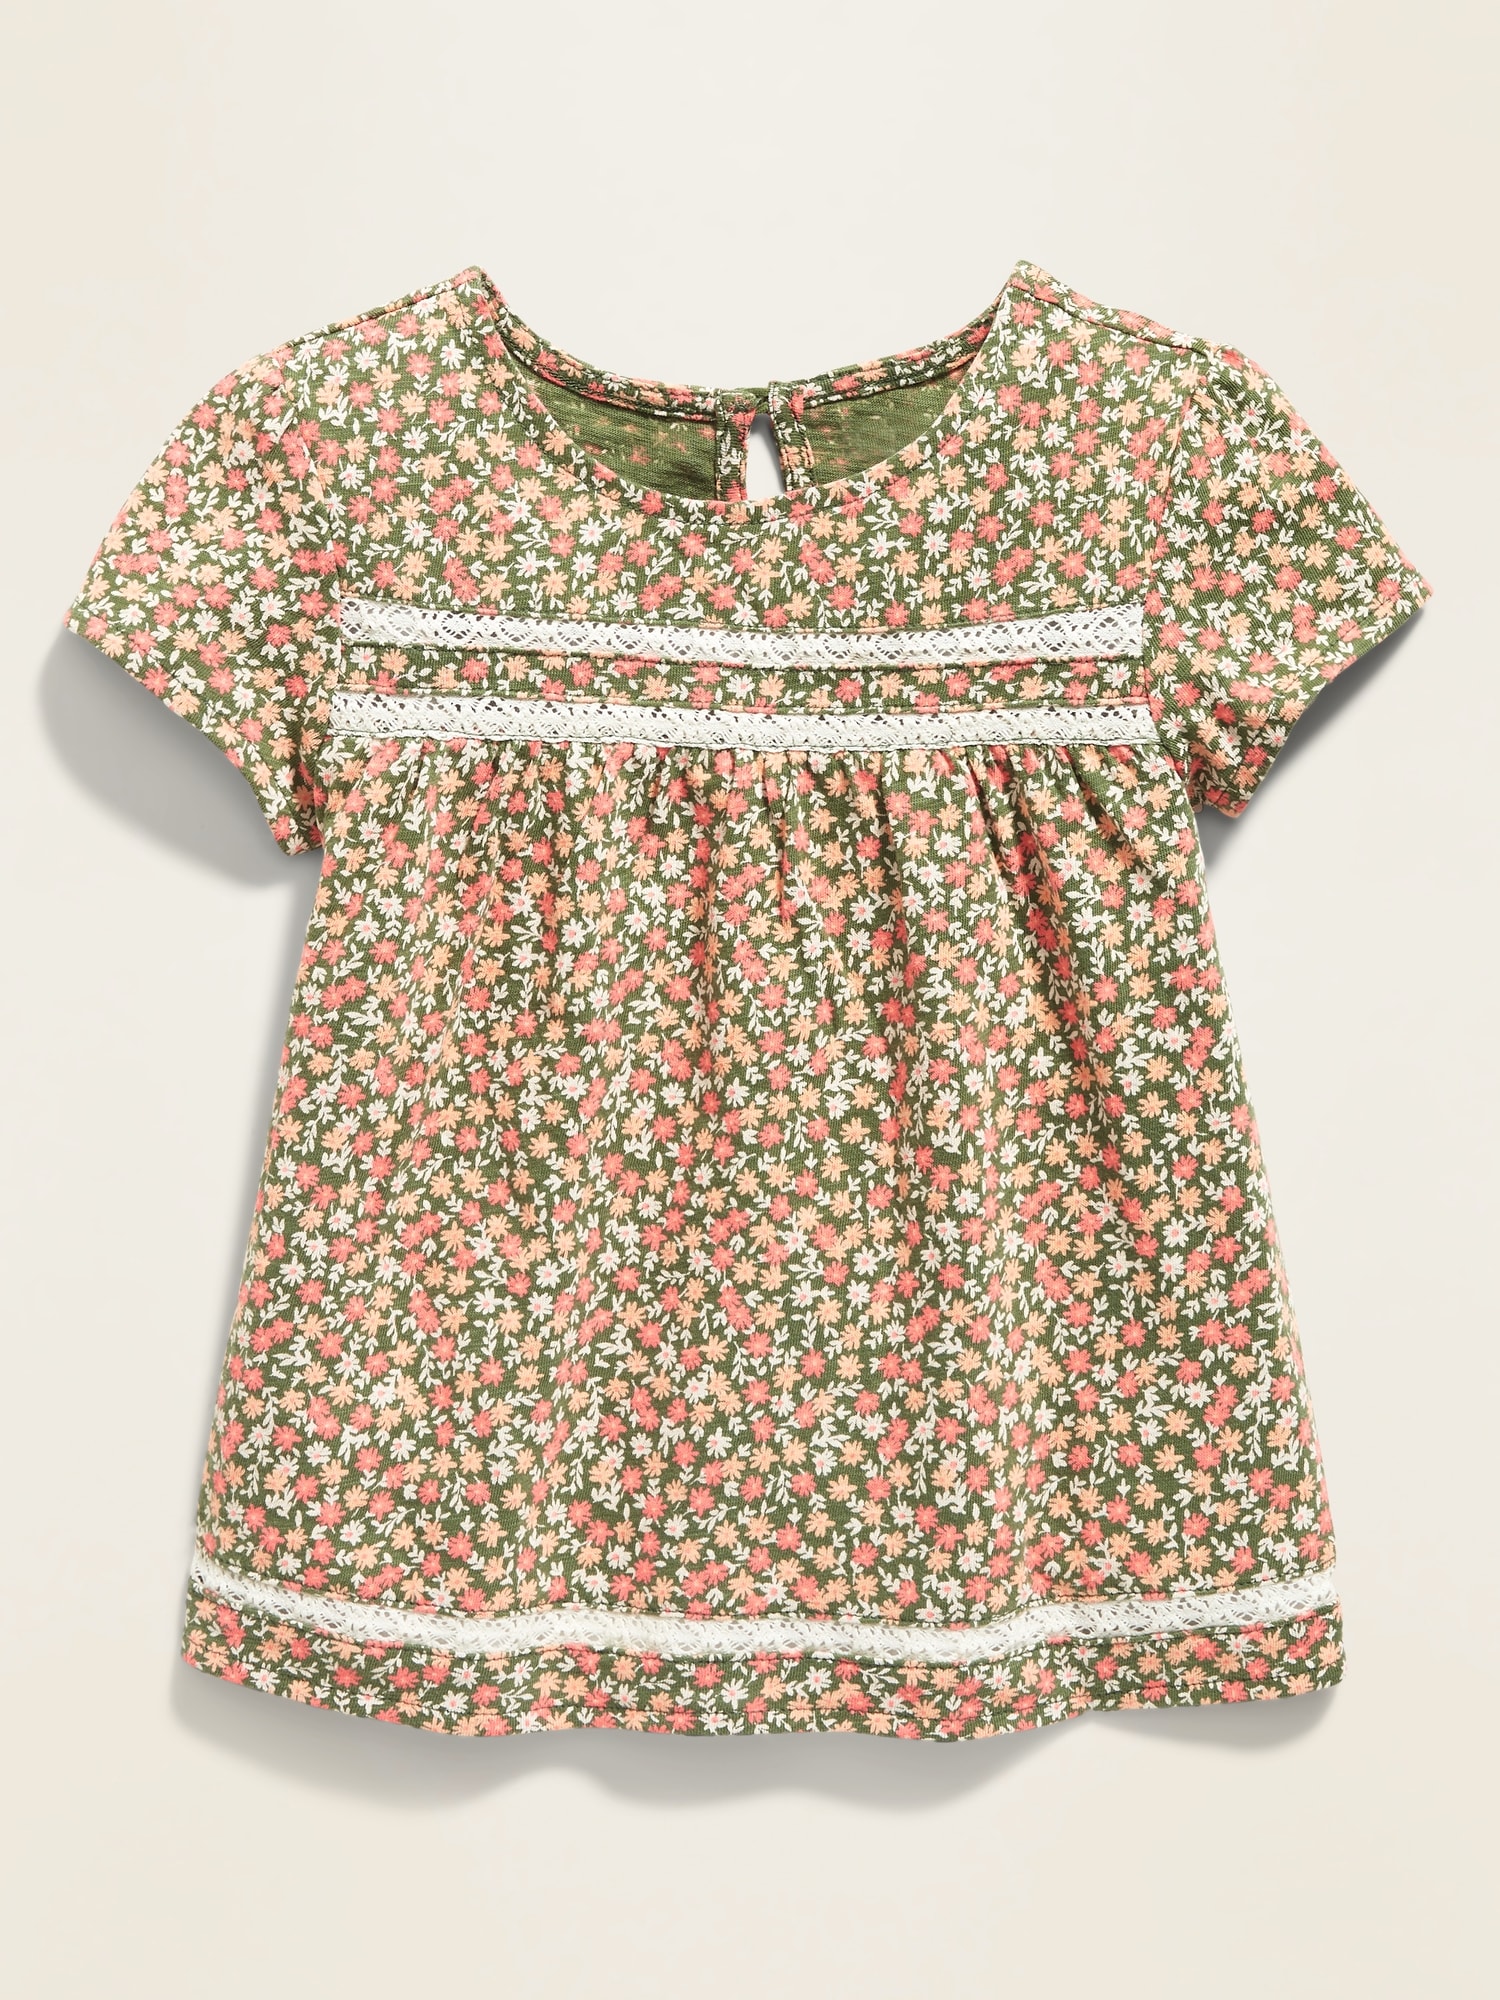 Crochet-Trim Floral Jersey Swing Top for Toddler Girls